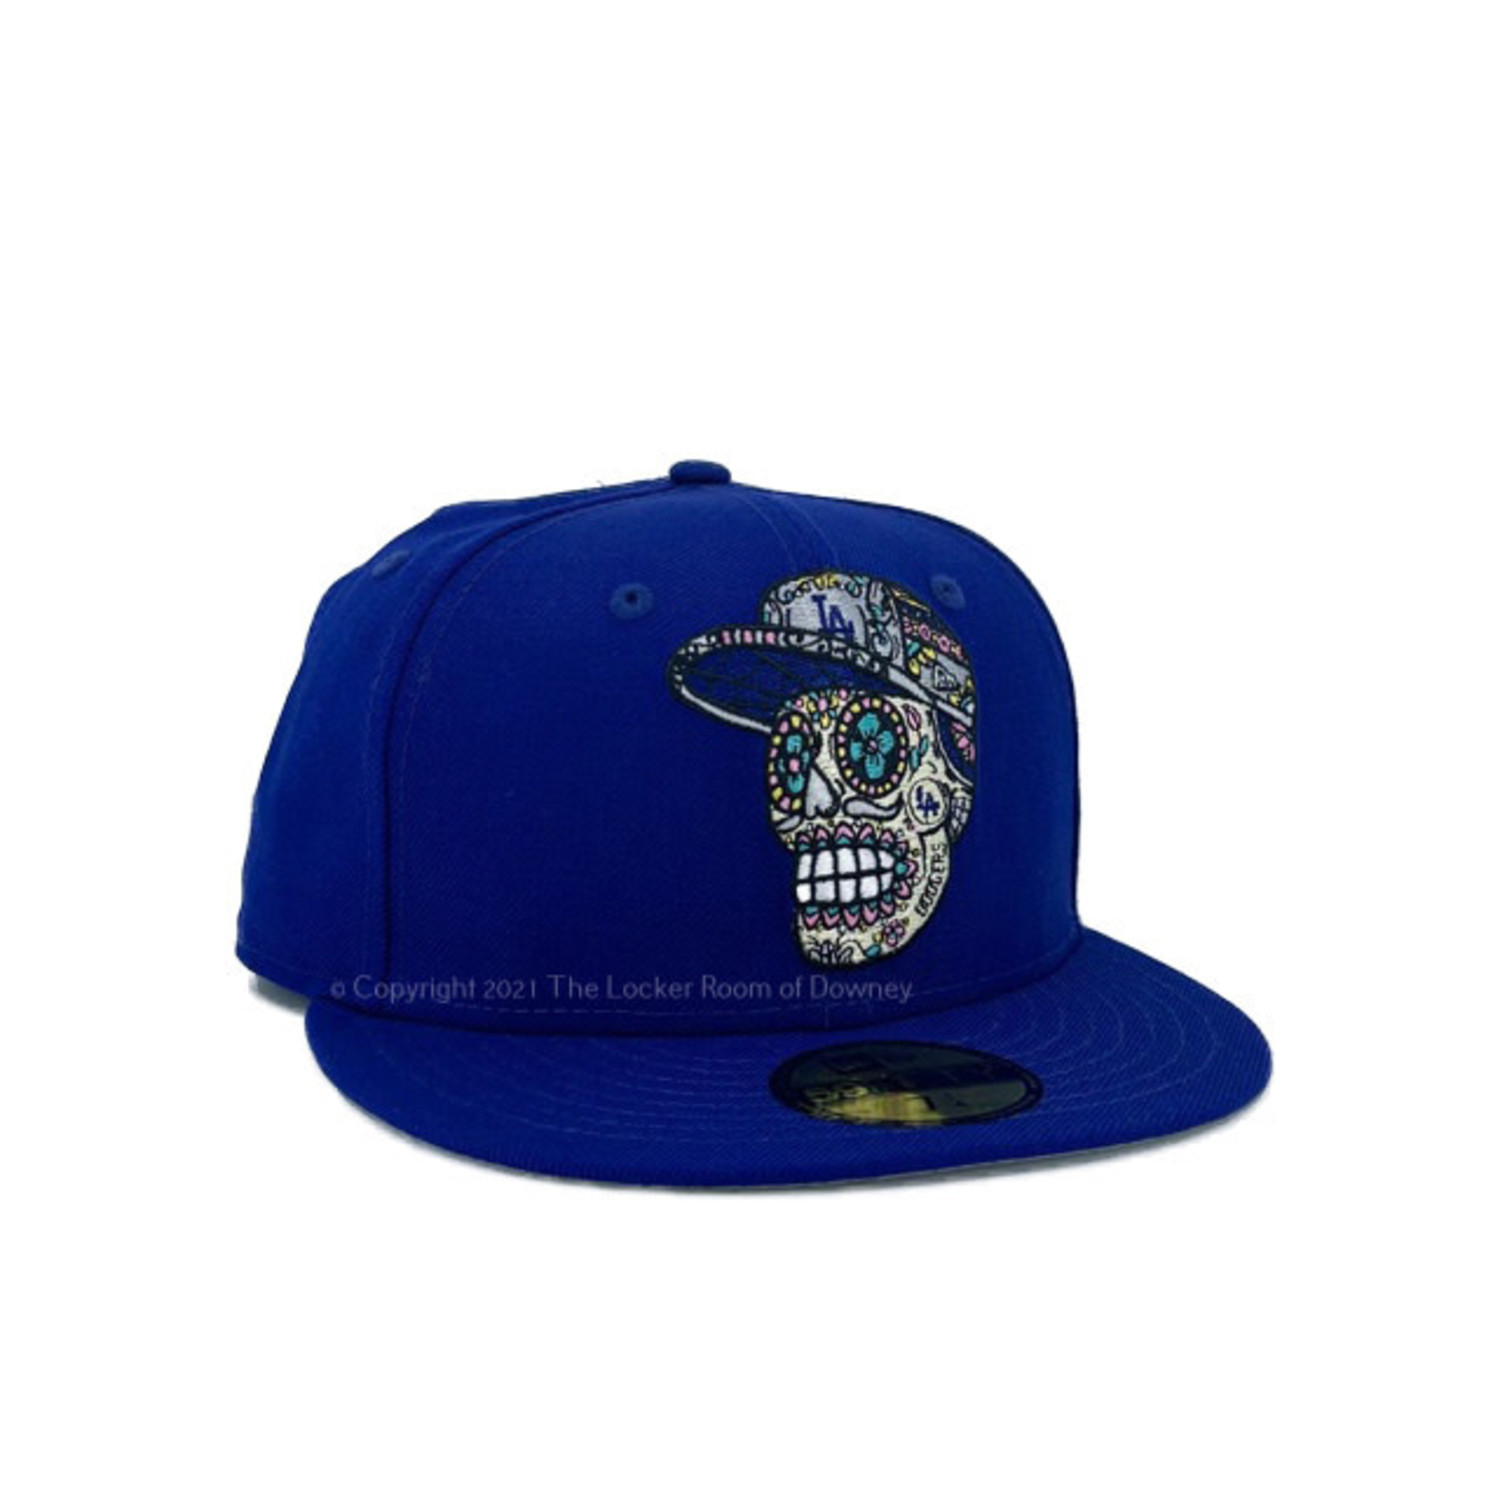 Dodgers Fitted New Era 59FIFTY Day of the Dead Sugar Skull Blue Cap Hat  GREY UV